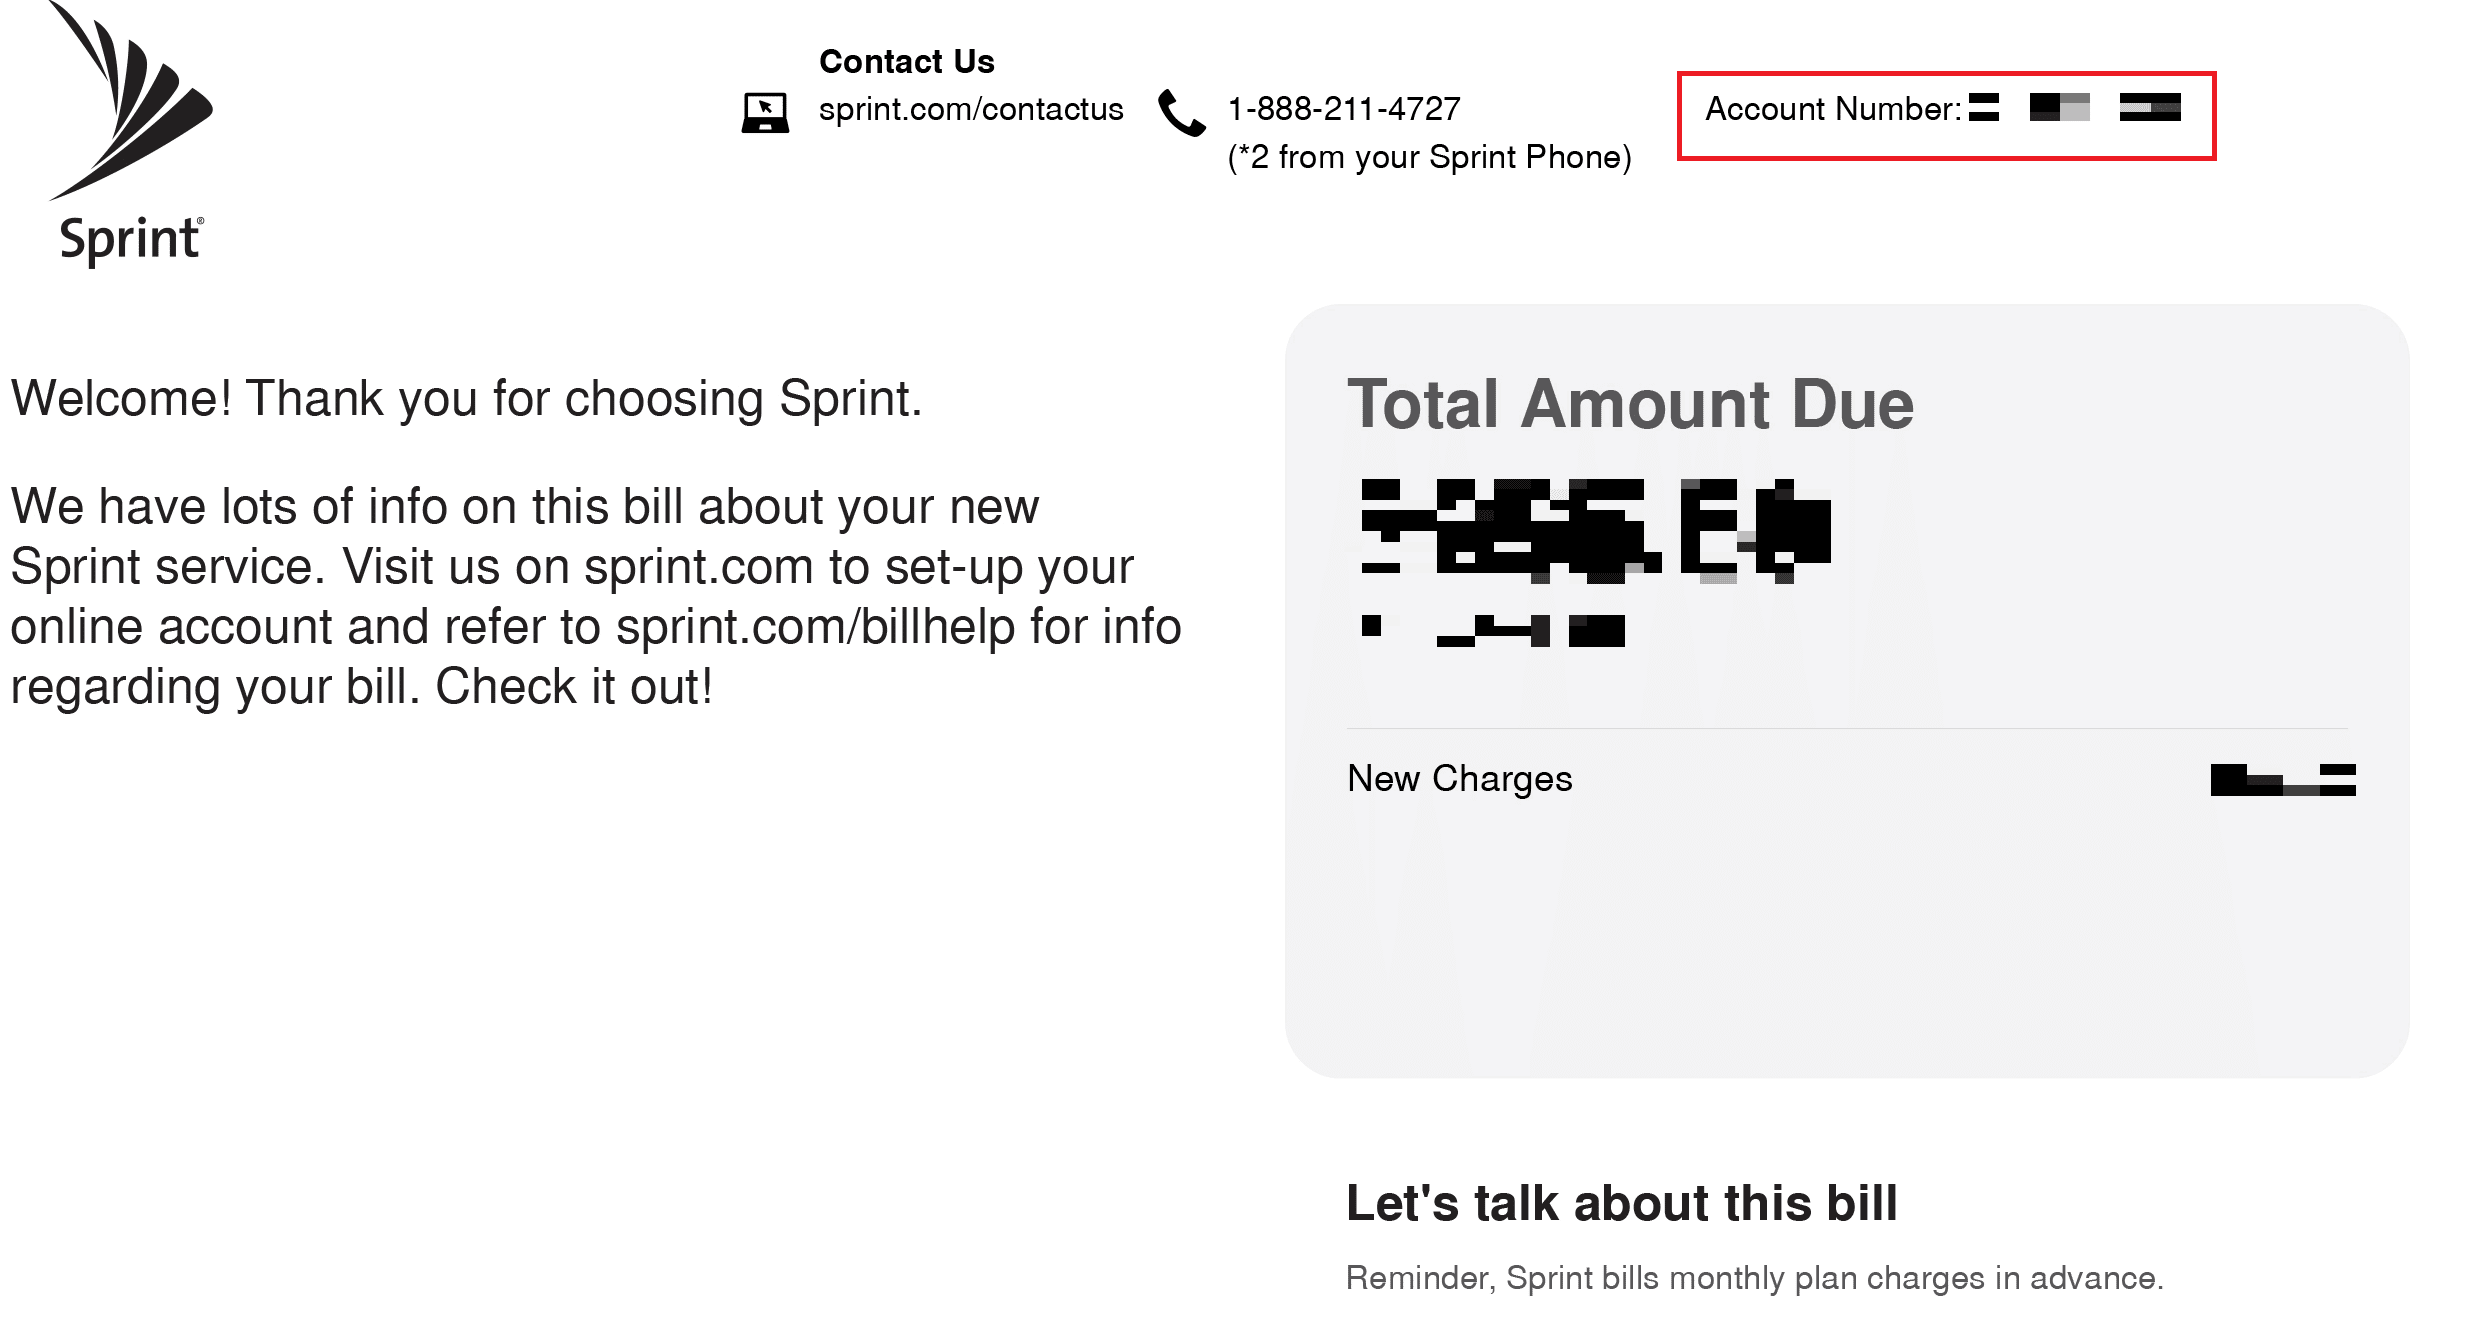 Locate the Sprint Account Number from the top right corner